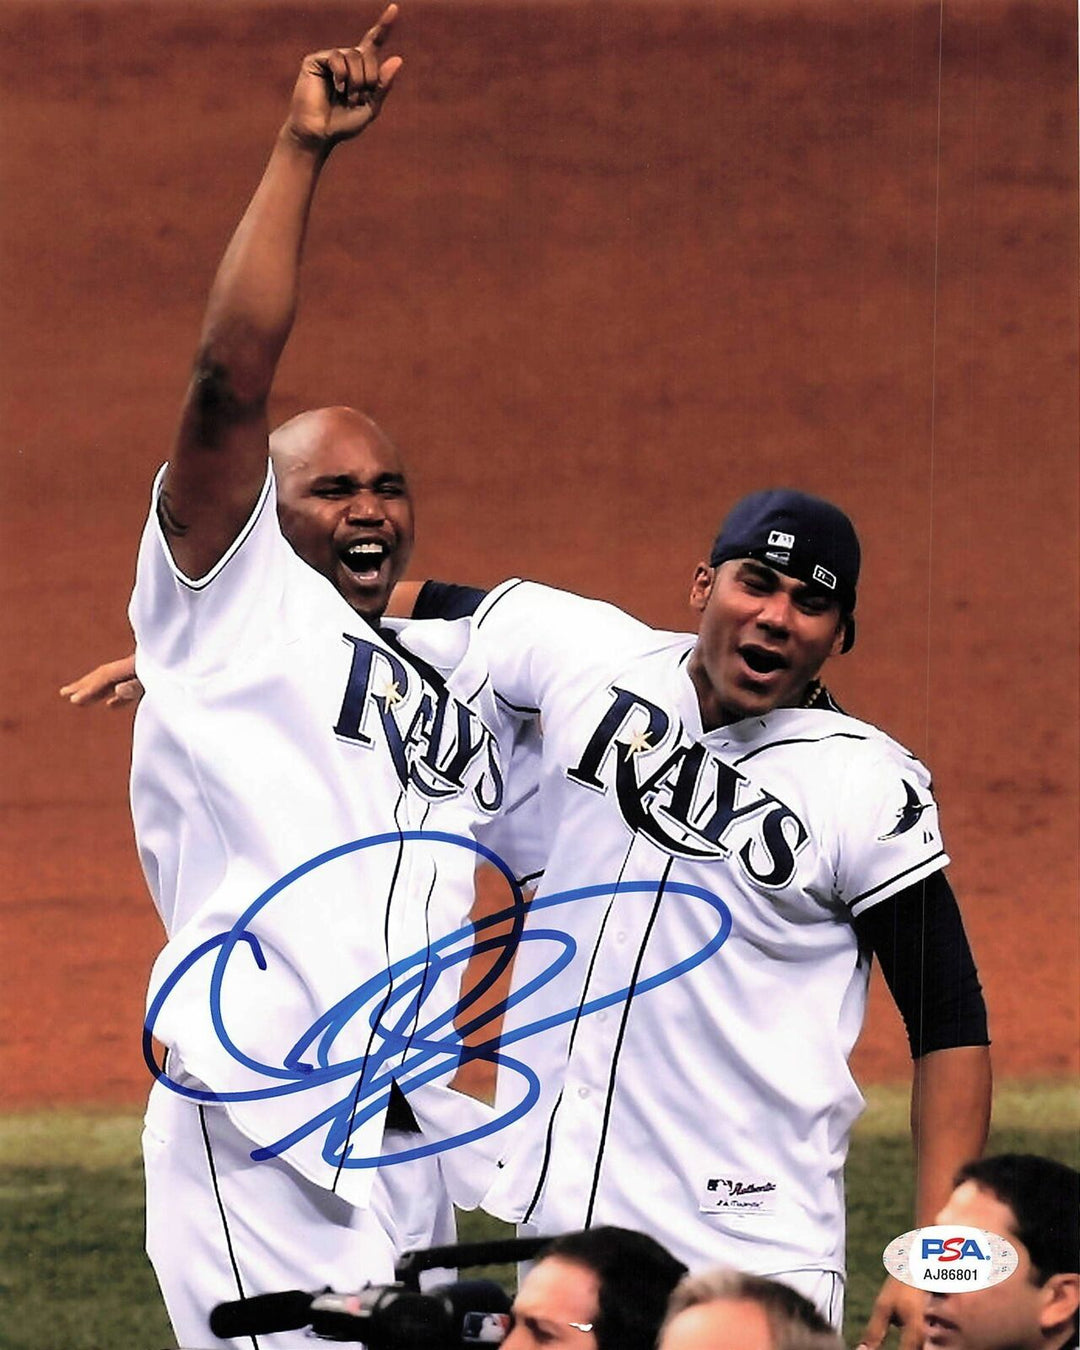 CLIFF FLOYD signed 8x10 photo PSA/DNA Autographed Tampa Bay Rays Image 5